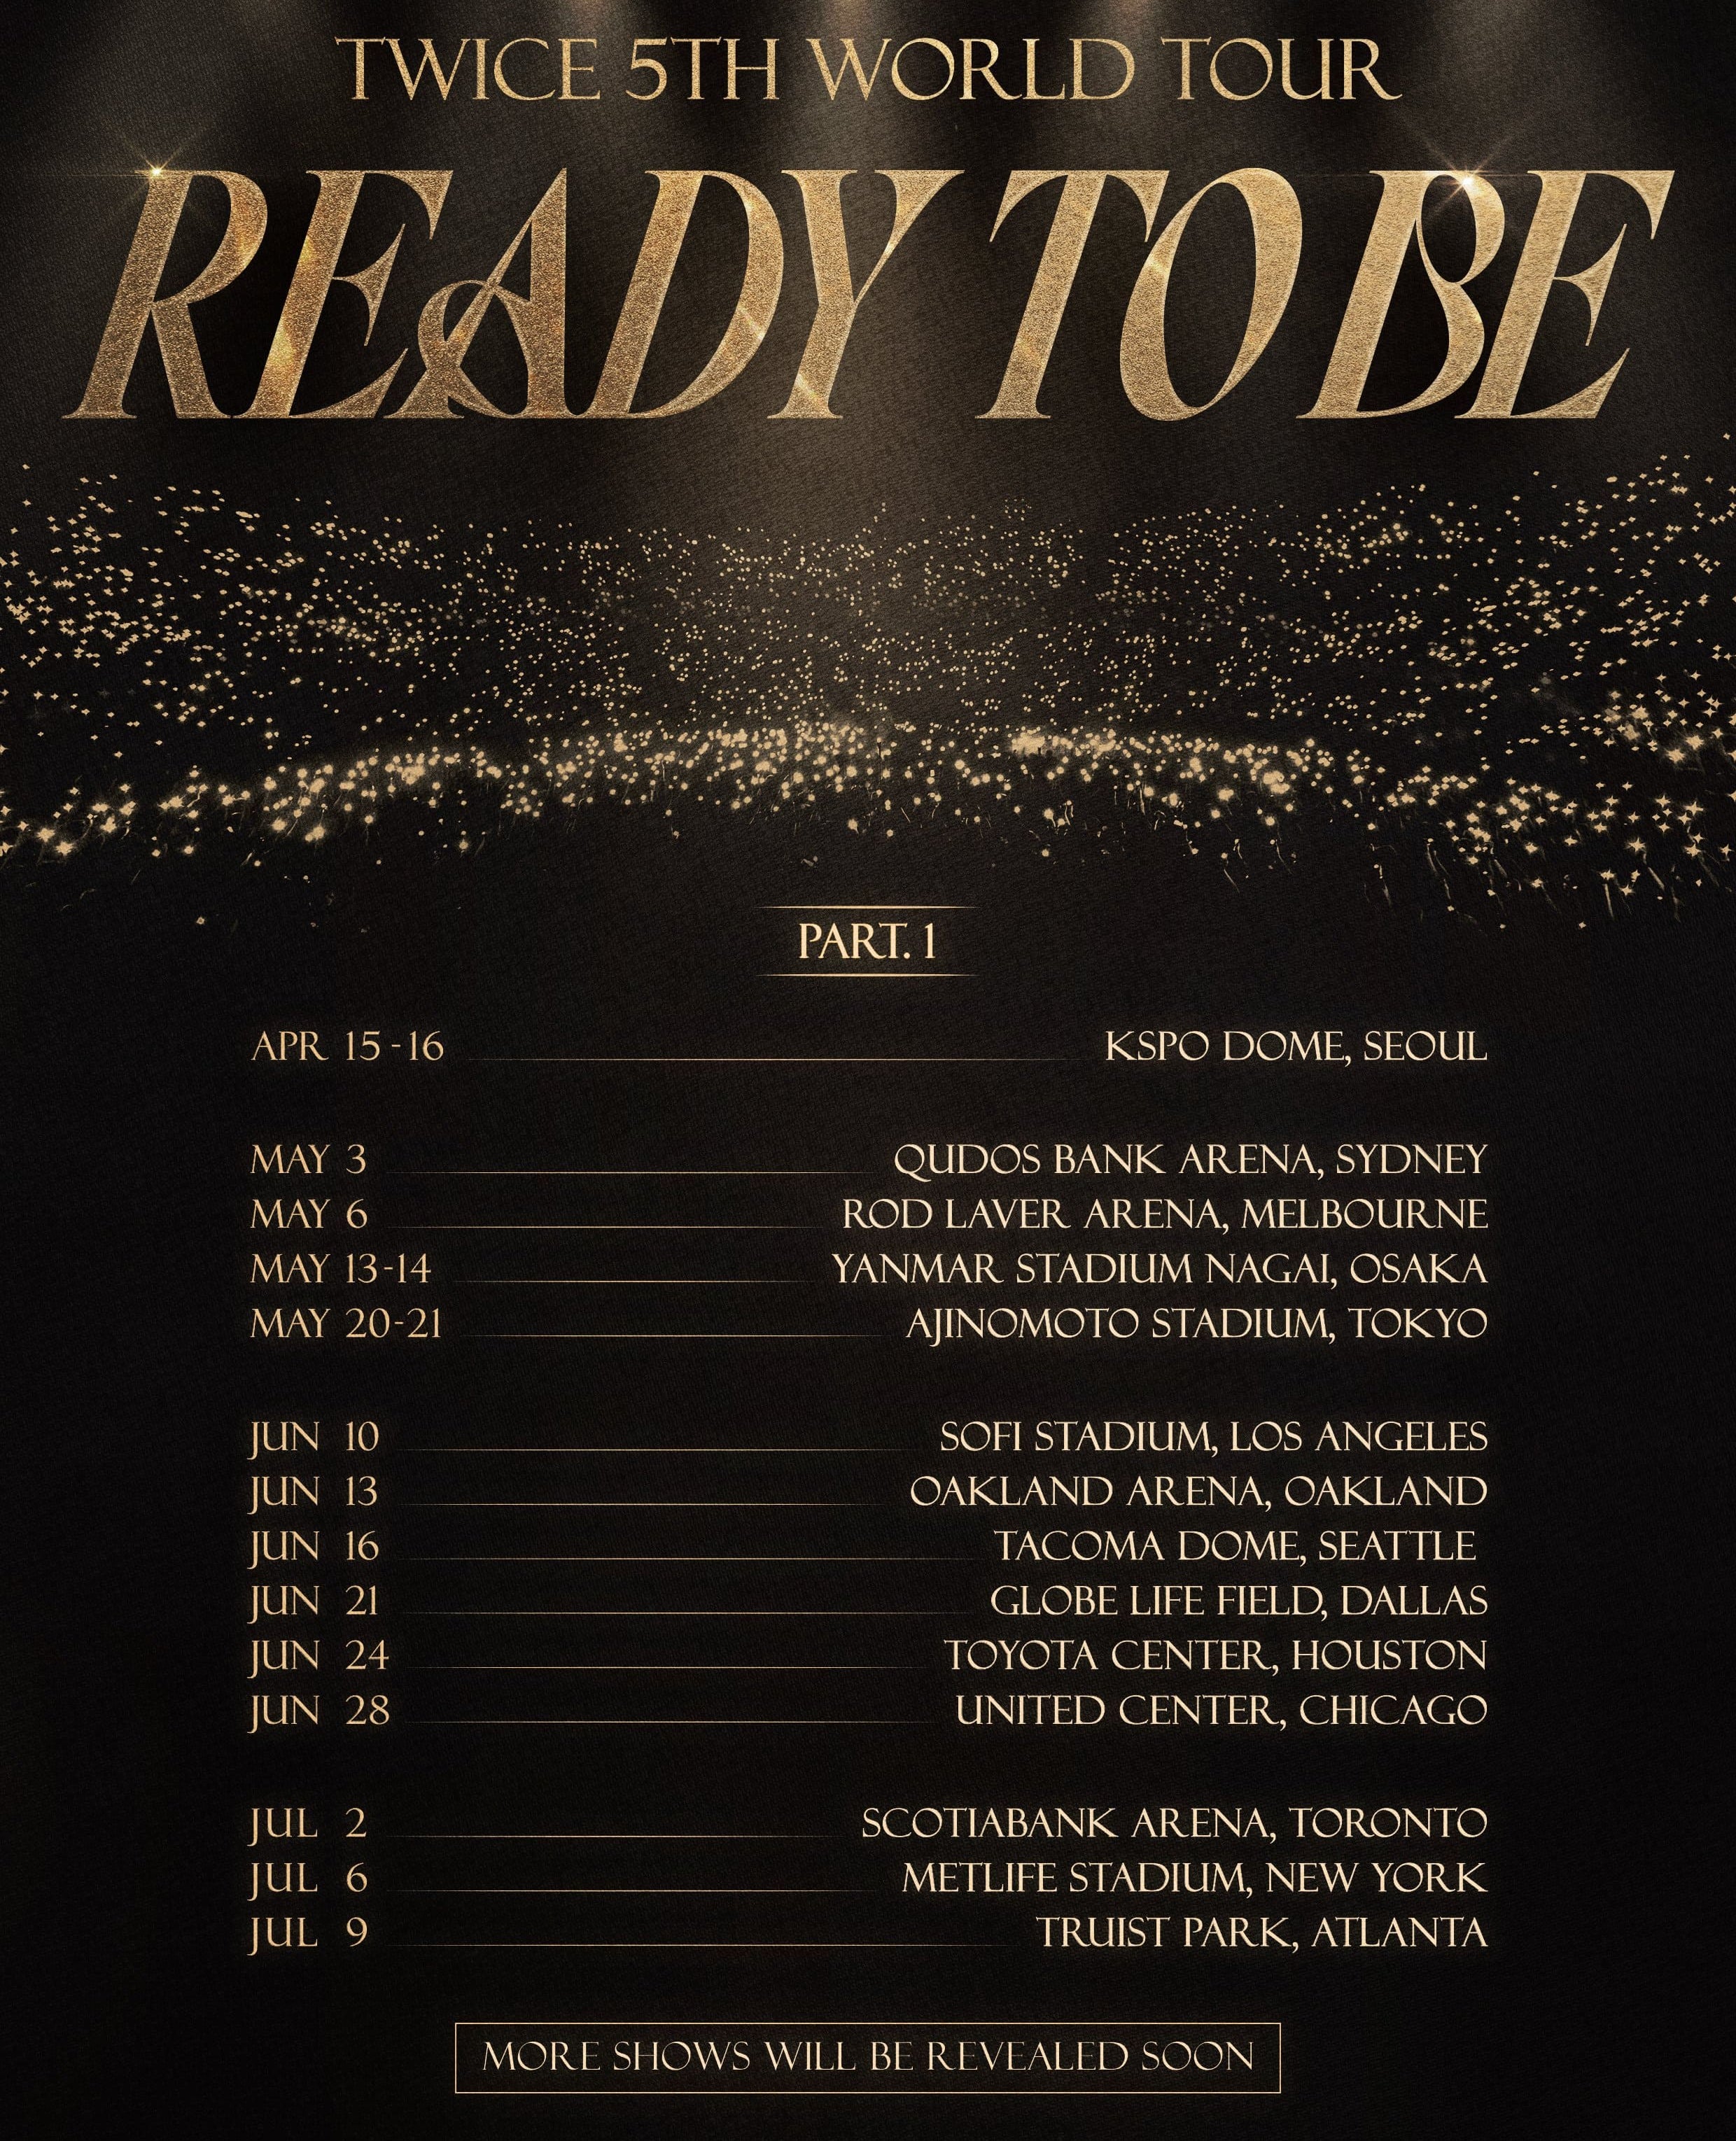 Twice 5th World Tour READY TO BE Part 1